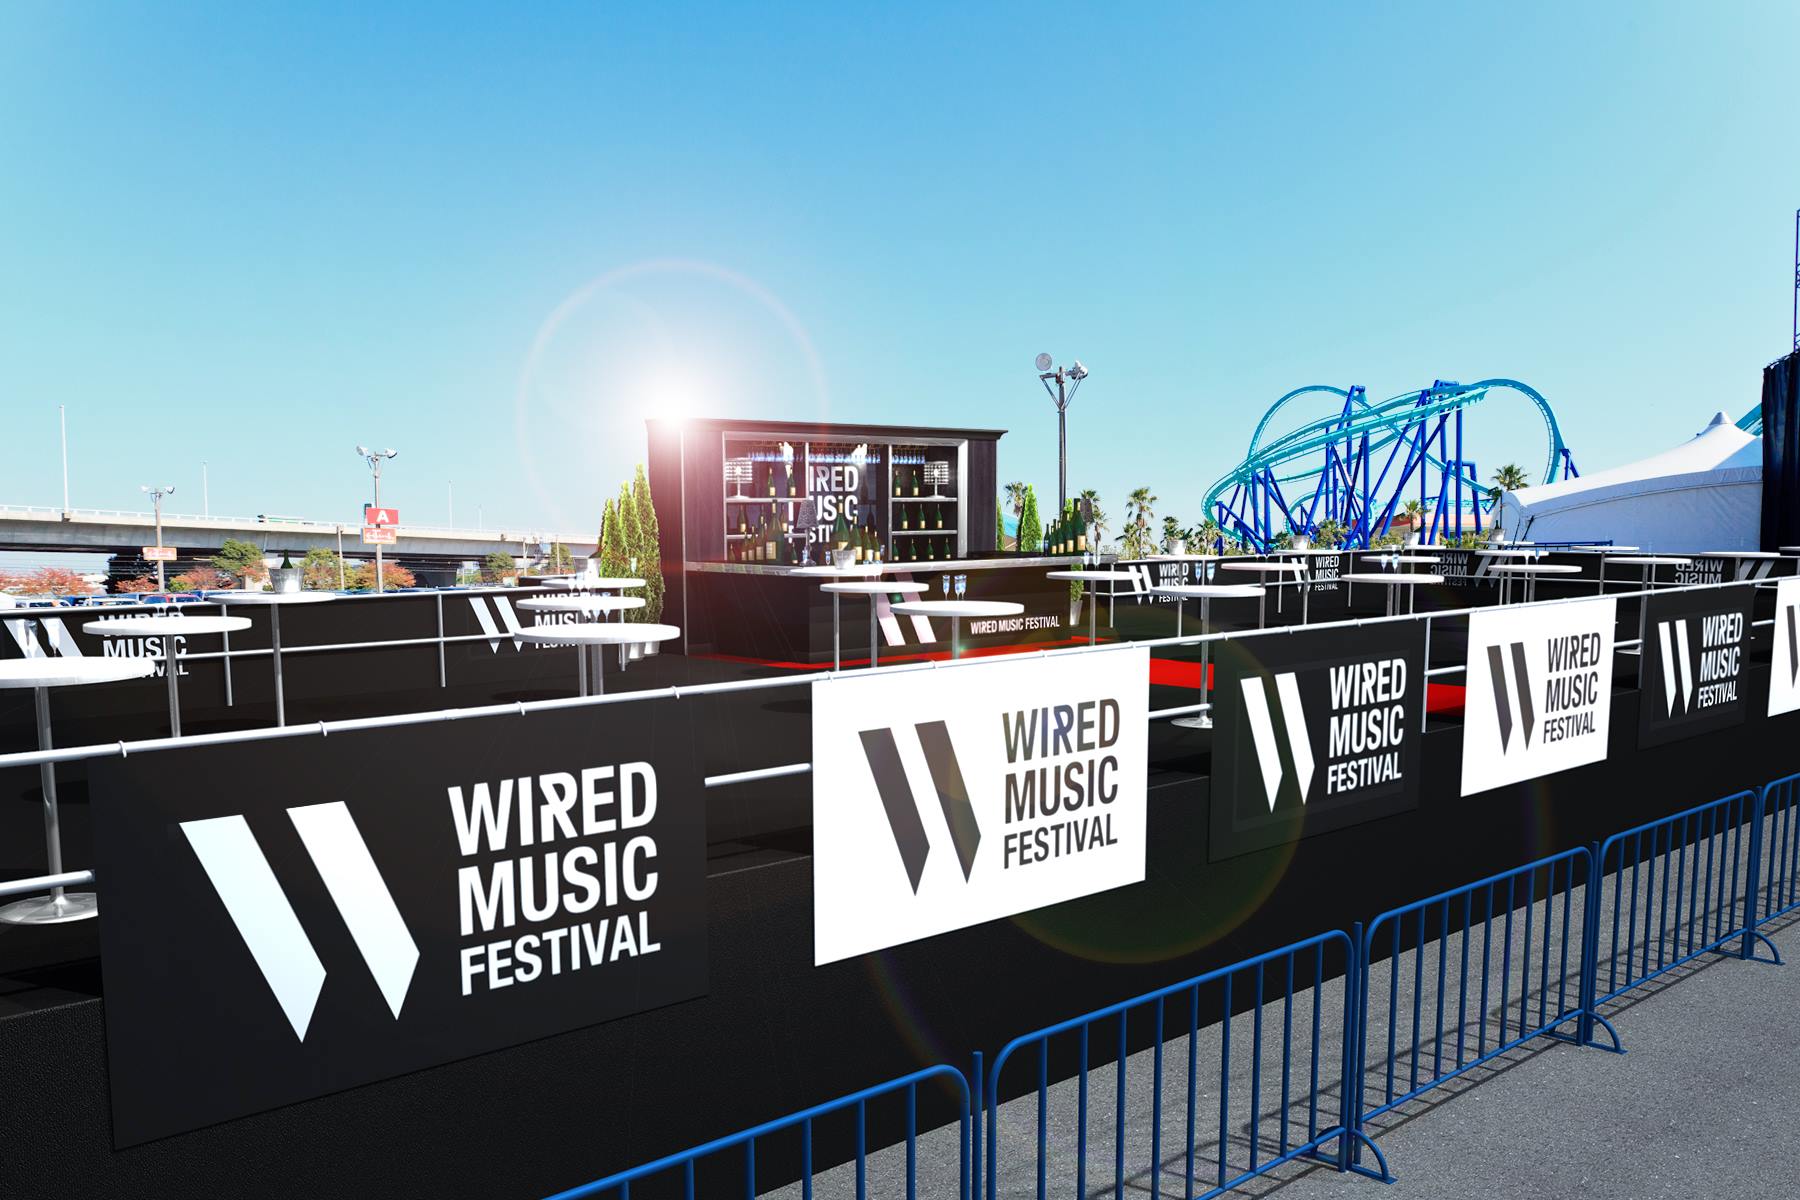 WIRED MUSIC FESTIVAL 2016 VIP